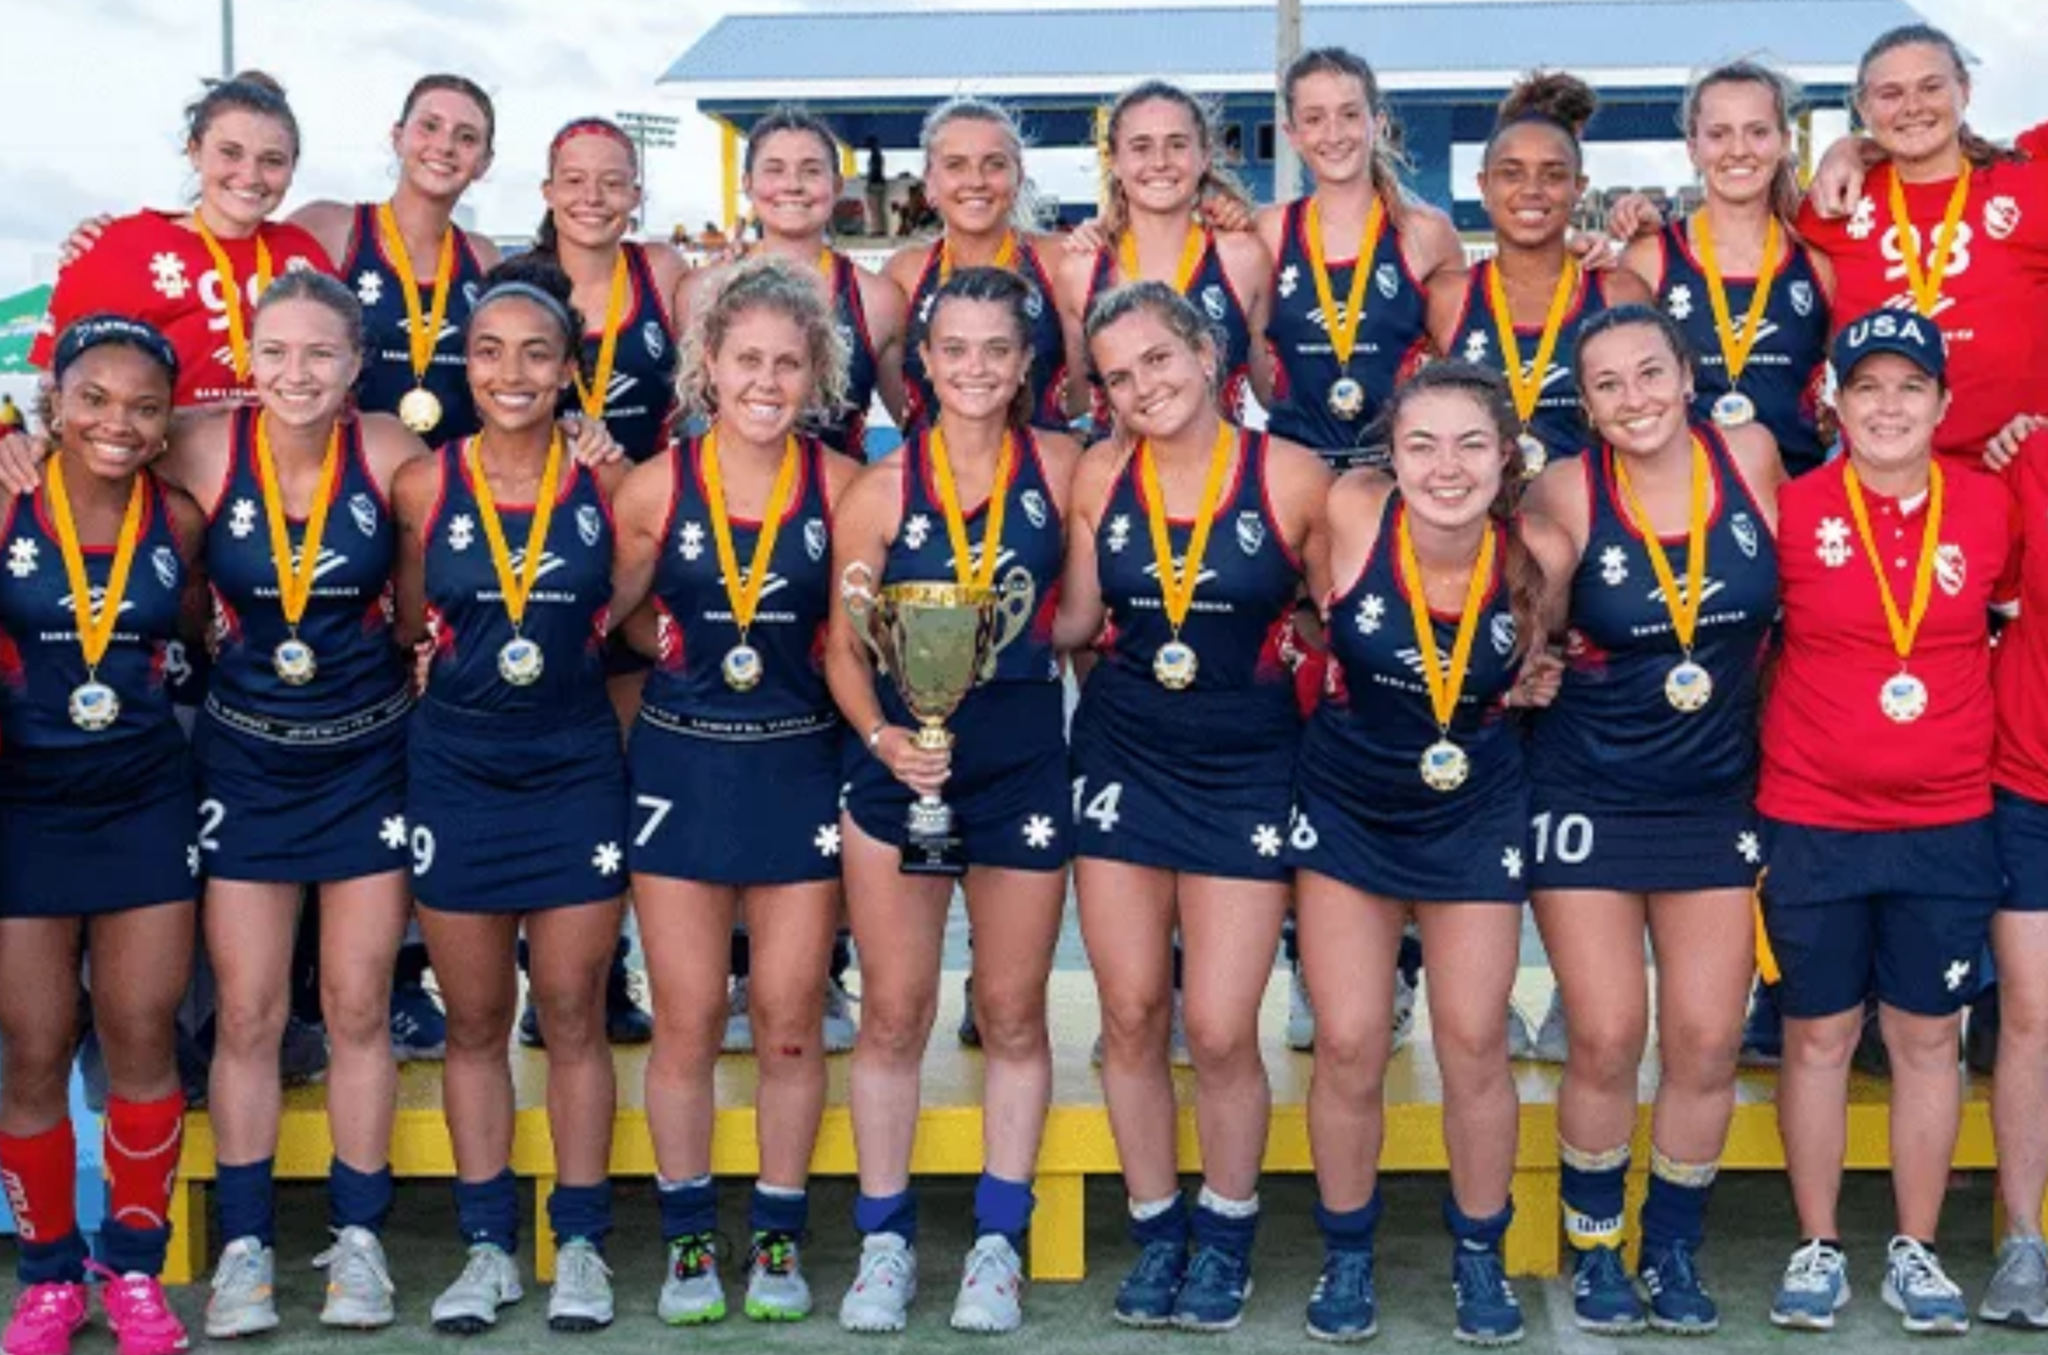 9 WC EAGLES PLAY FOR USA IN MAJOR INTERNATIONAL TOURNAMENTS